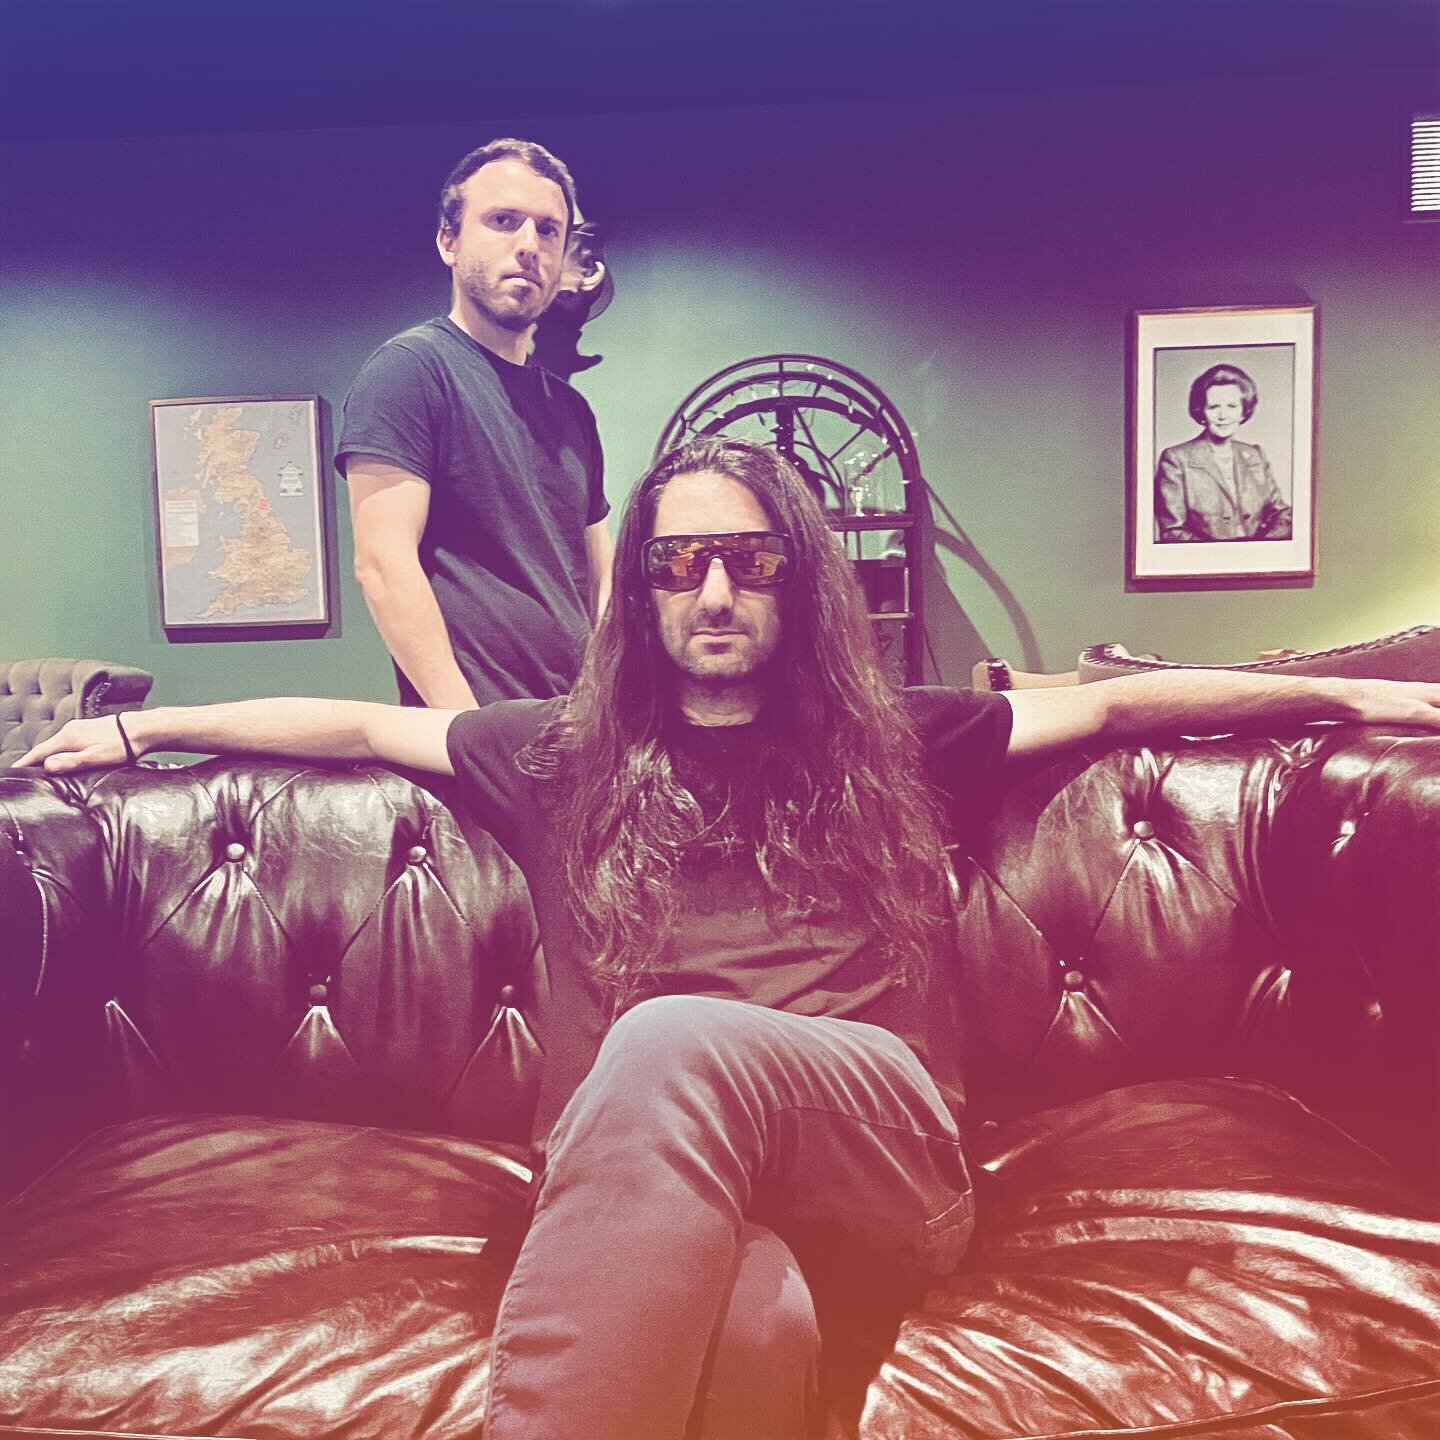 Just act natural

#seriousface #fancycouch #fatldatr #sideproject #indiemusicians #greenroom #behindthescenes #tourstuff #thisblissmusic #beforetheshow #ontheroadagain